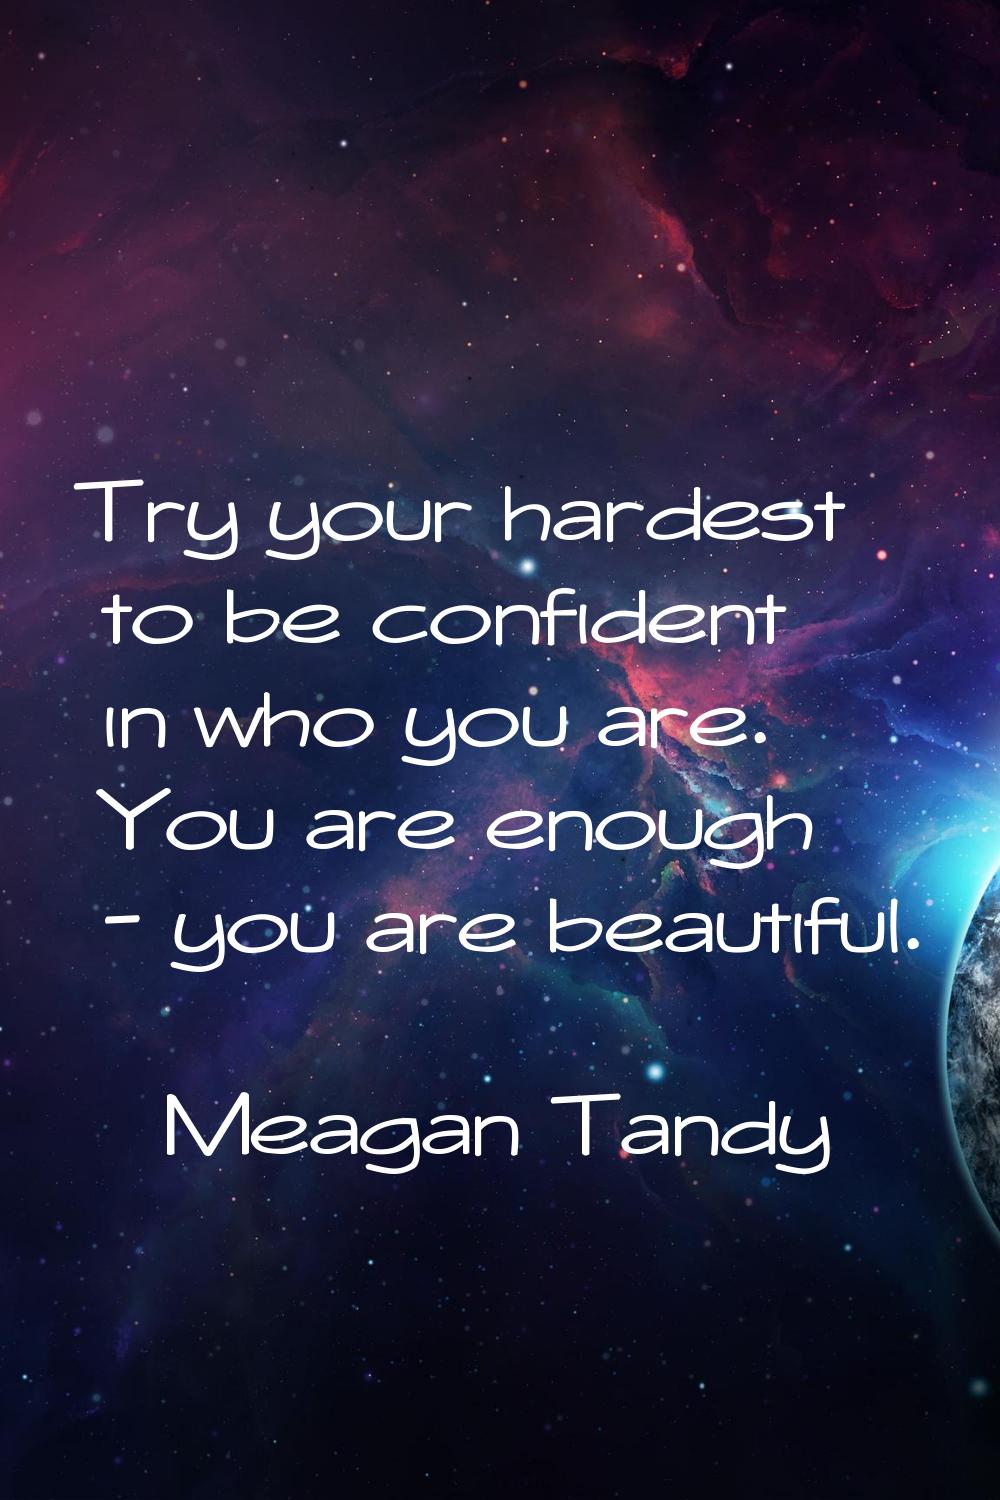 Try your hardest to be confident in who you are. You are enough - you are beautiful.